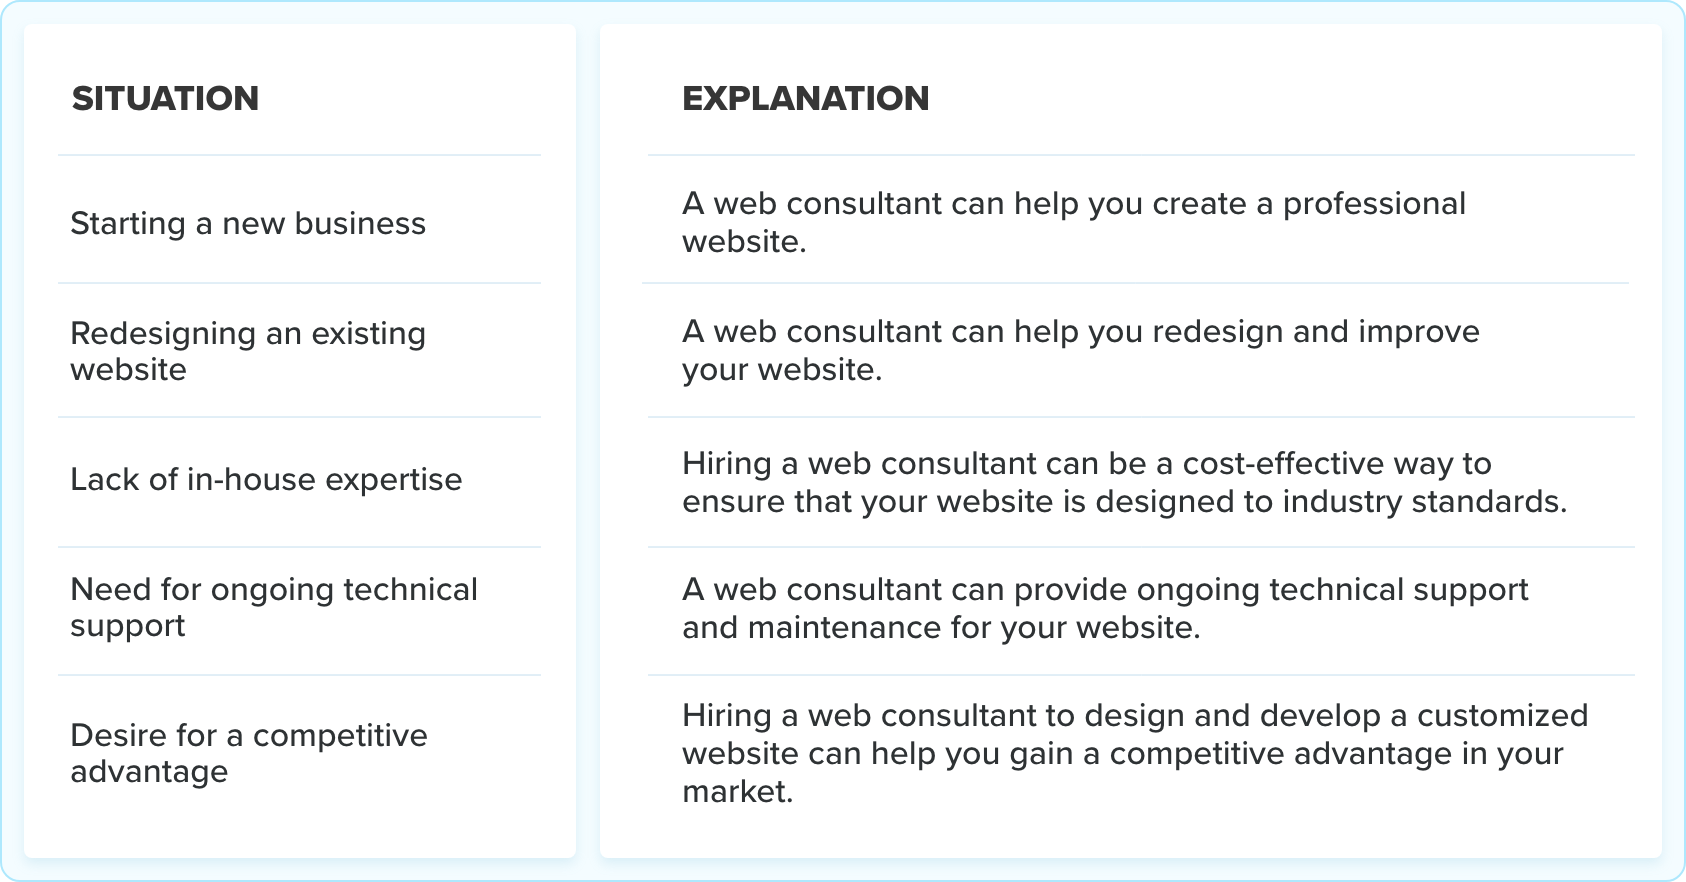 When to Hire a Web Consultant